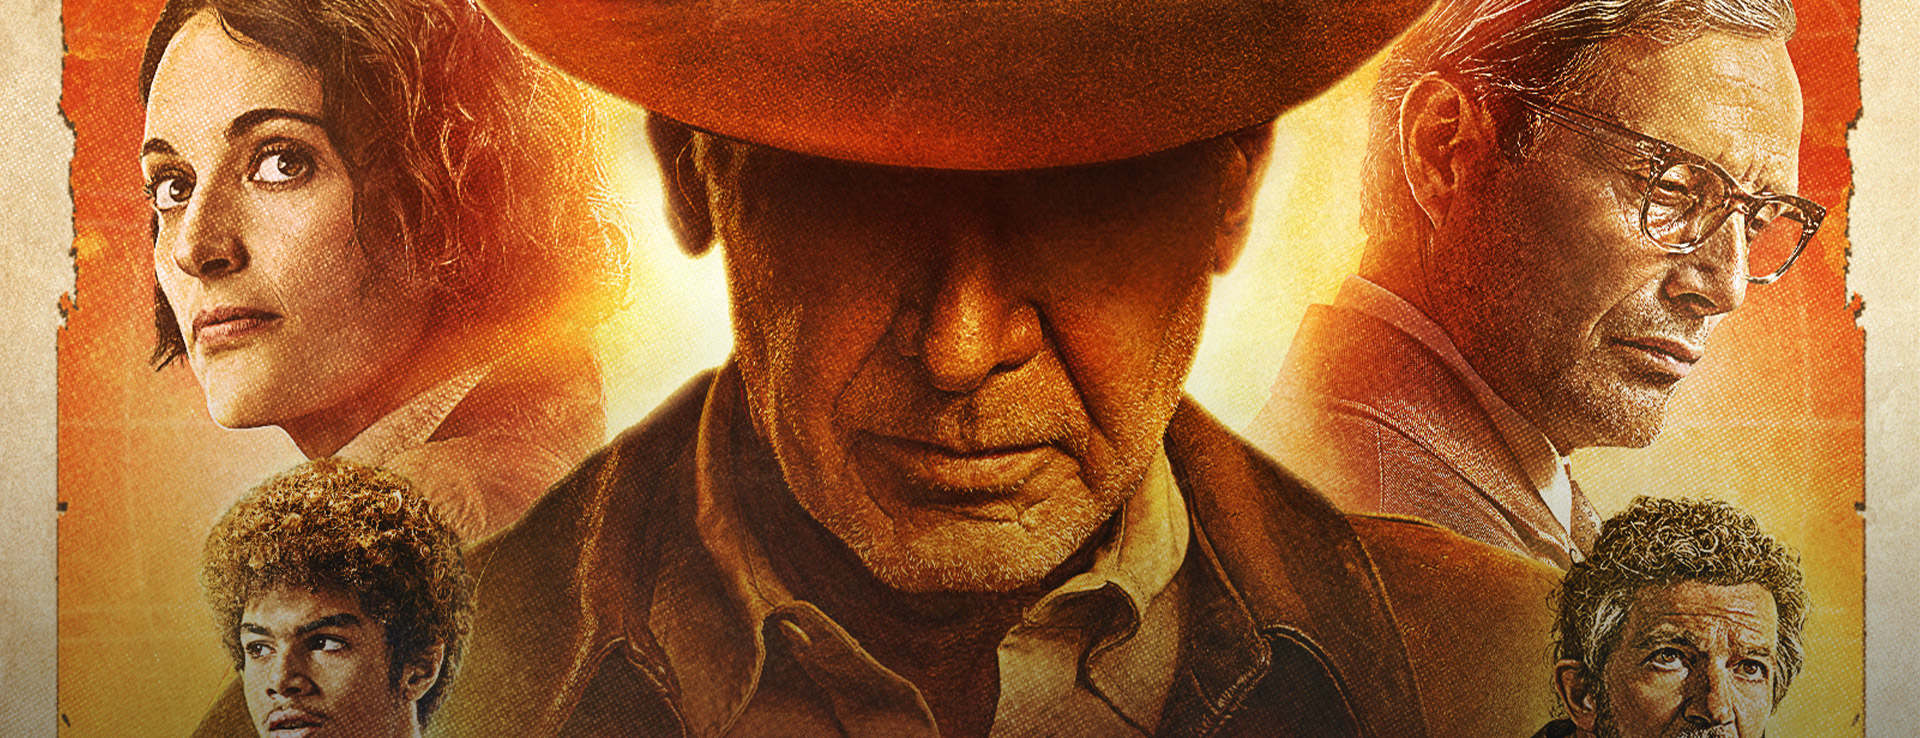 Indiana Jones and the Dial of Destiny Comes Home December 5